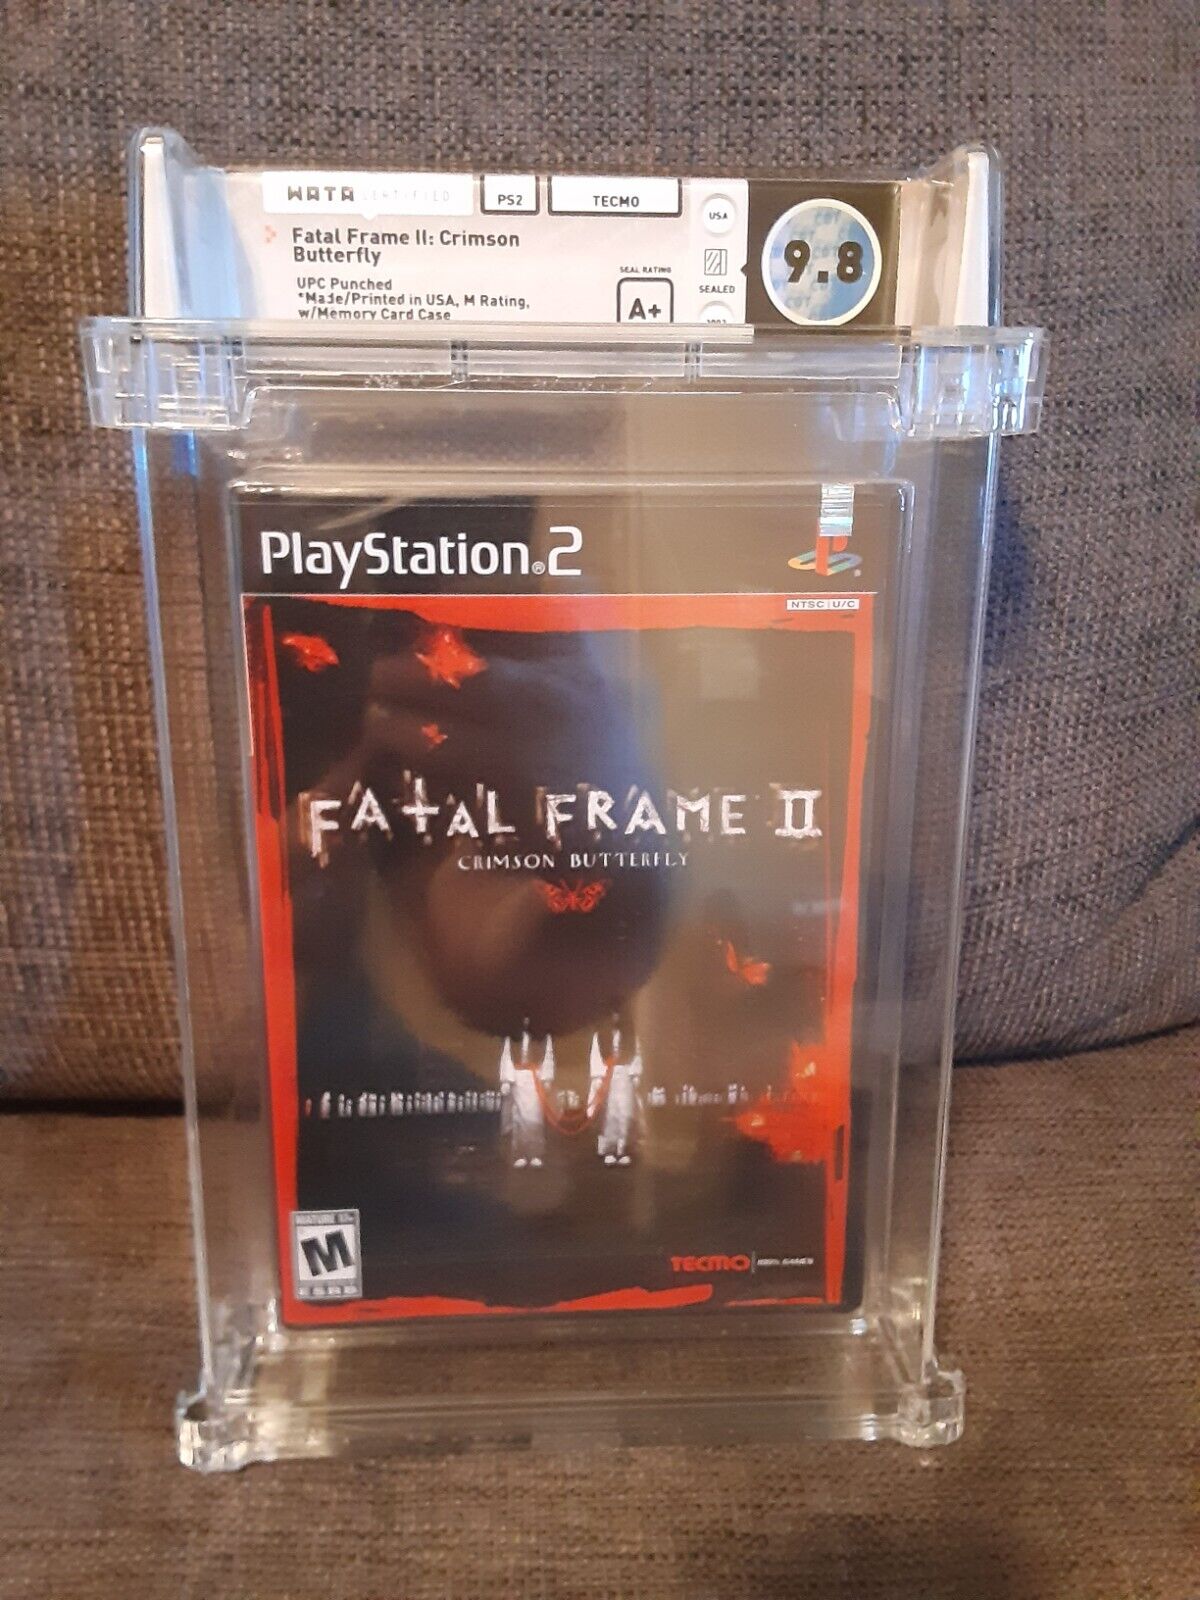 Fatal Frame II Crimson Butterfly (Playstation 2 PS2) WATA 9.8 A+ New Sealed